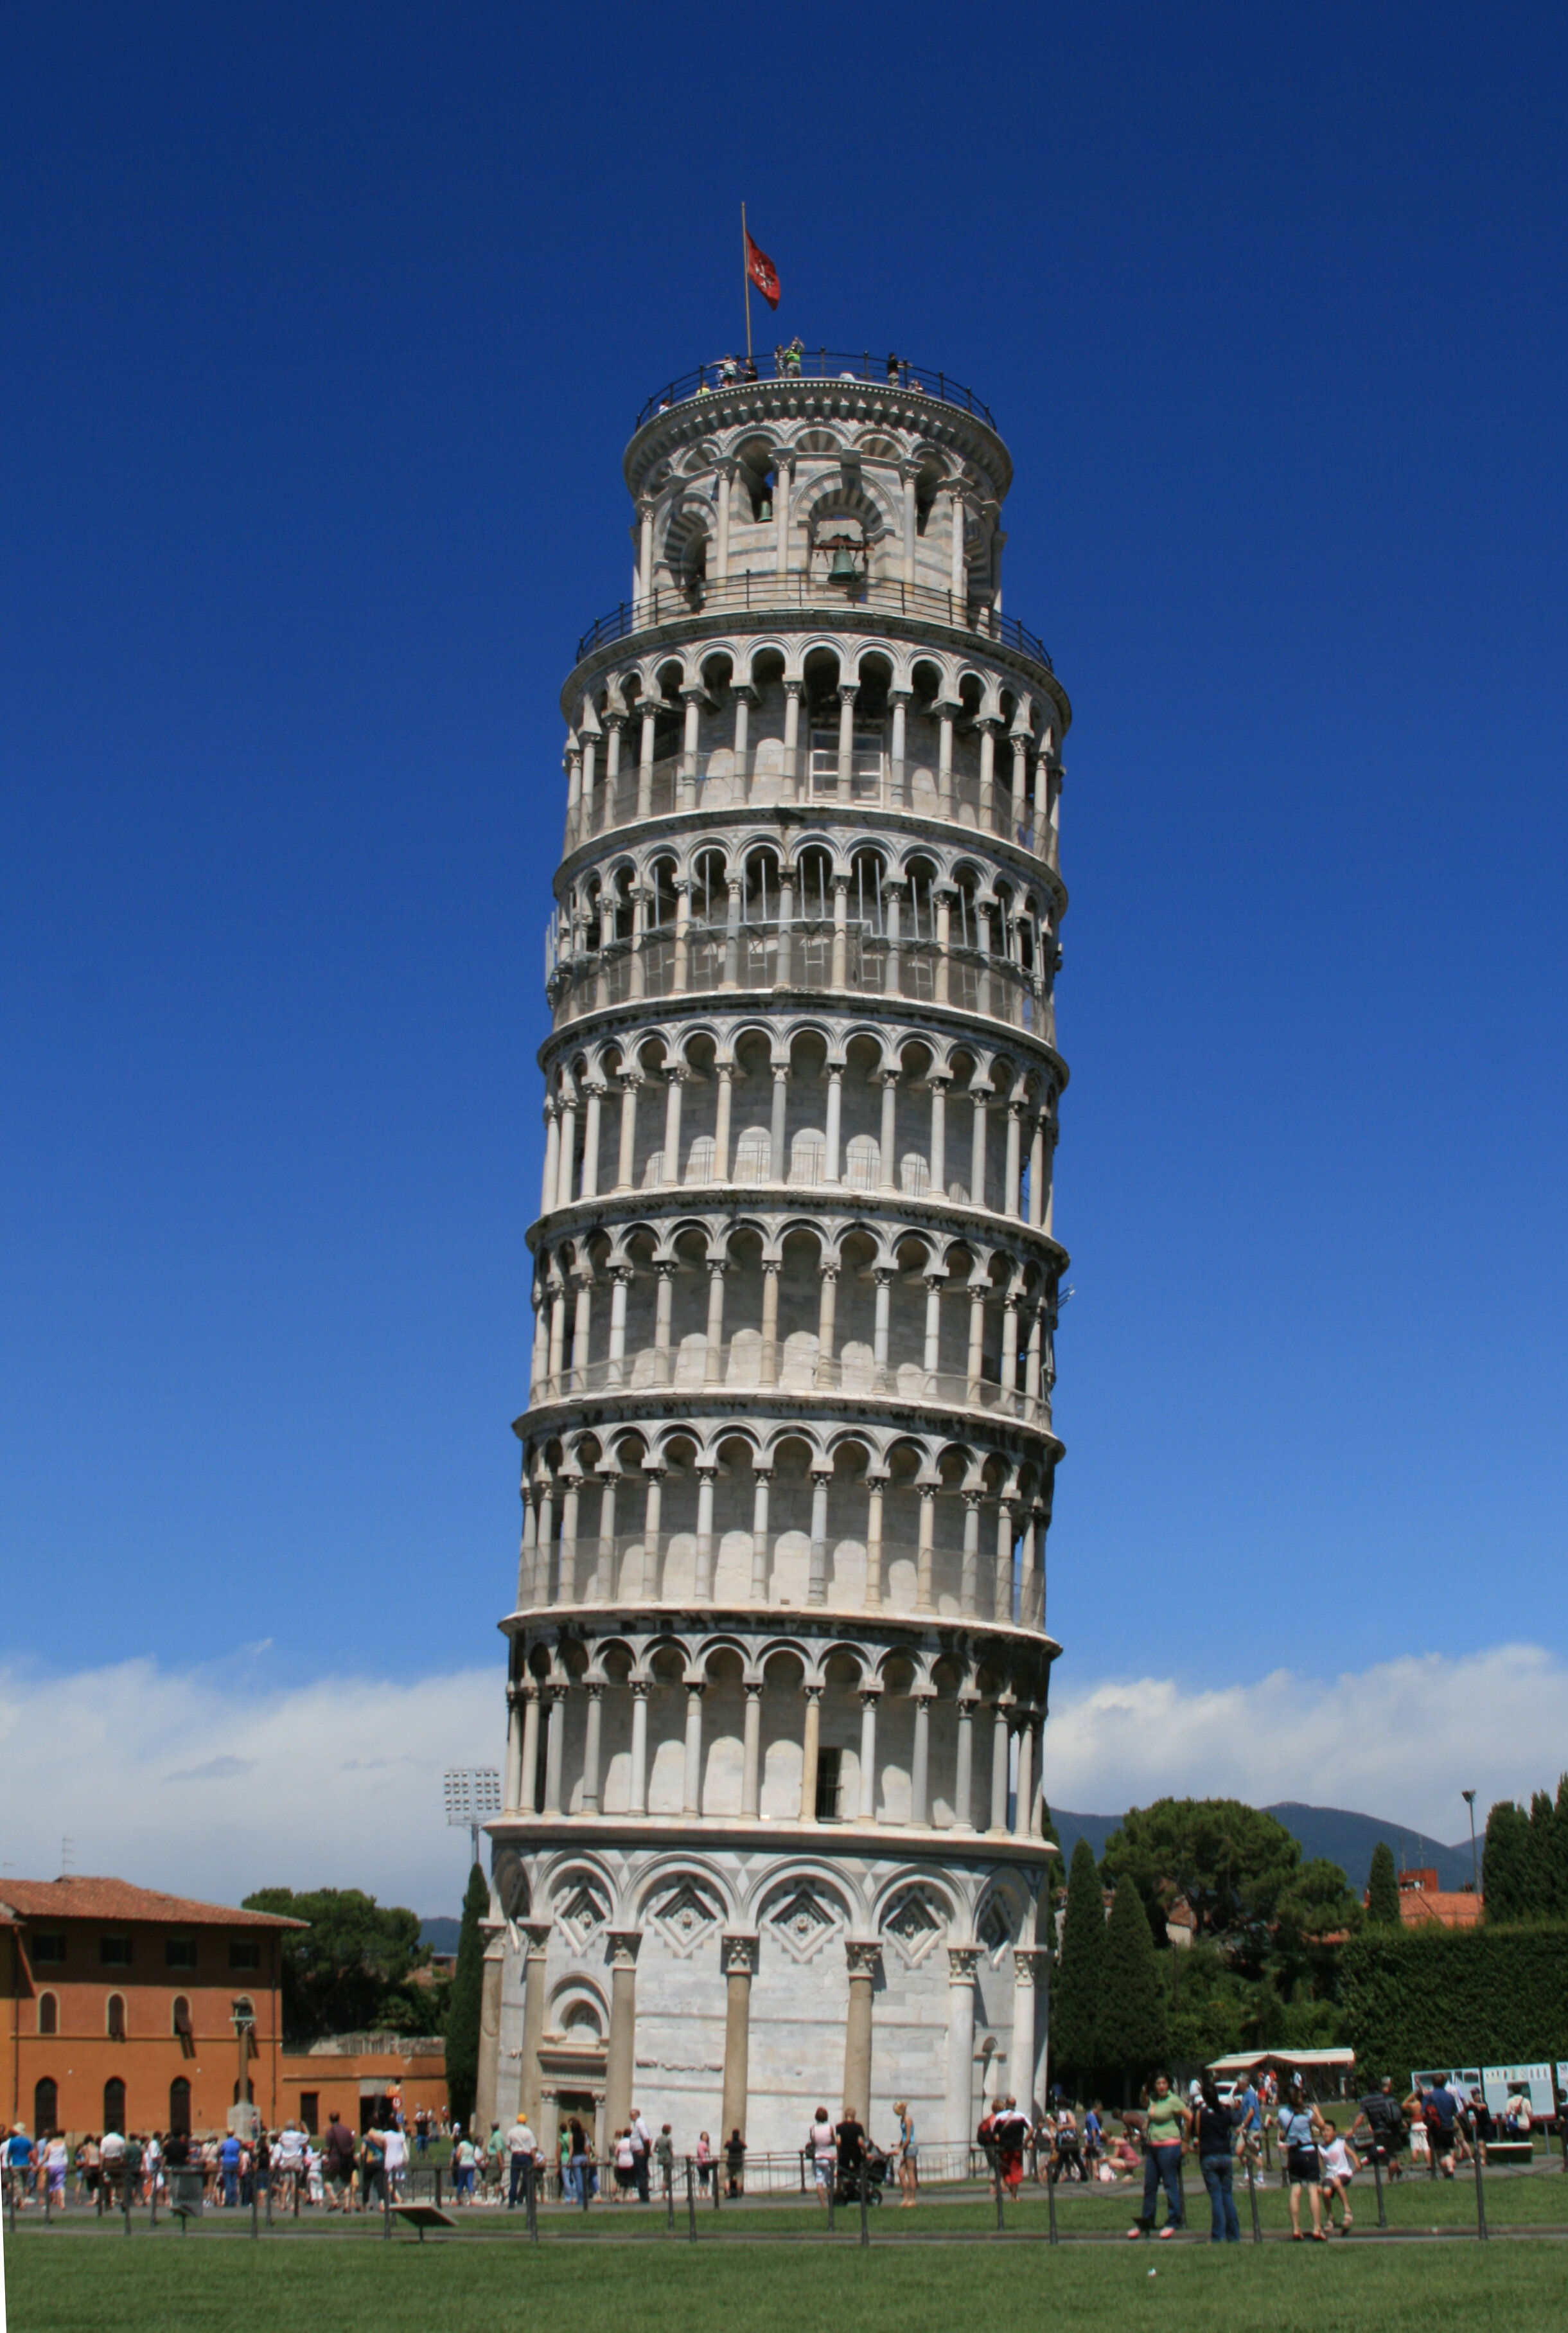  Leaning Tower, Pisa, Italy         